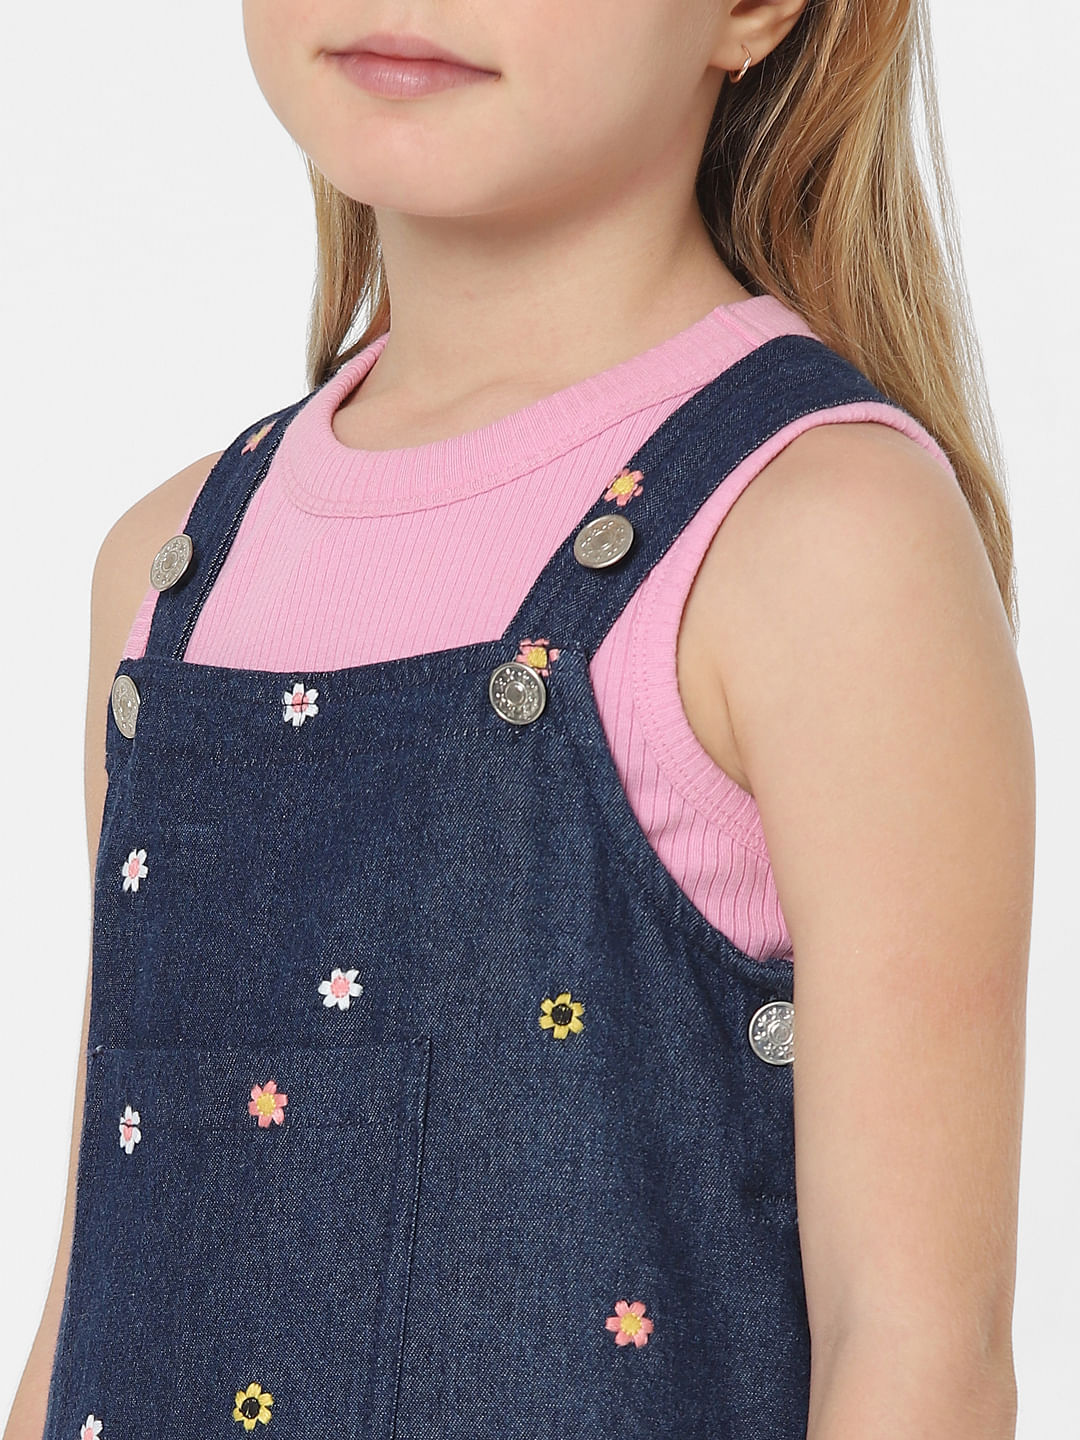 Check Navy and Beige Dungaree Dress. Sizes 2 to 4 Years. Spanish Girls Dress.  High Quality Cotton Dress. Girls Dress. Toddler Dress. - Etsy